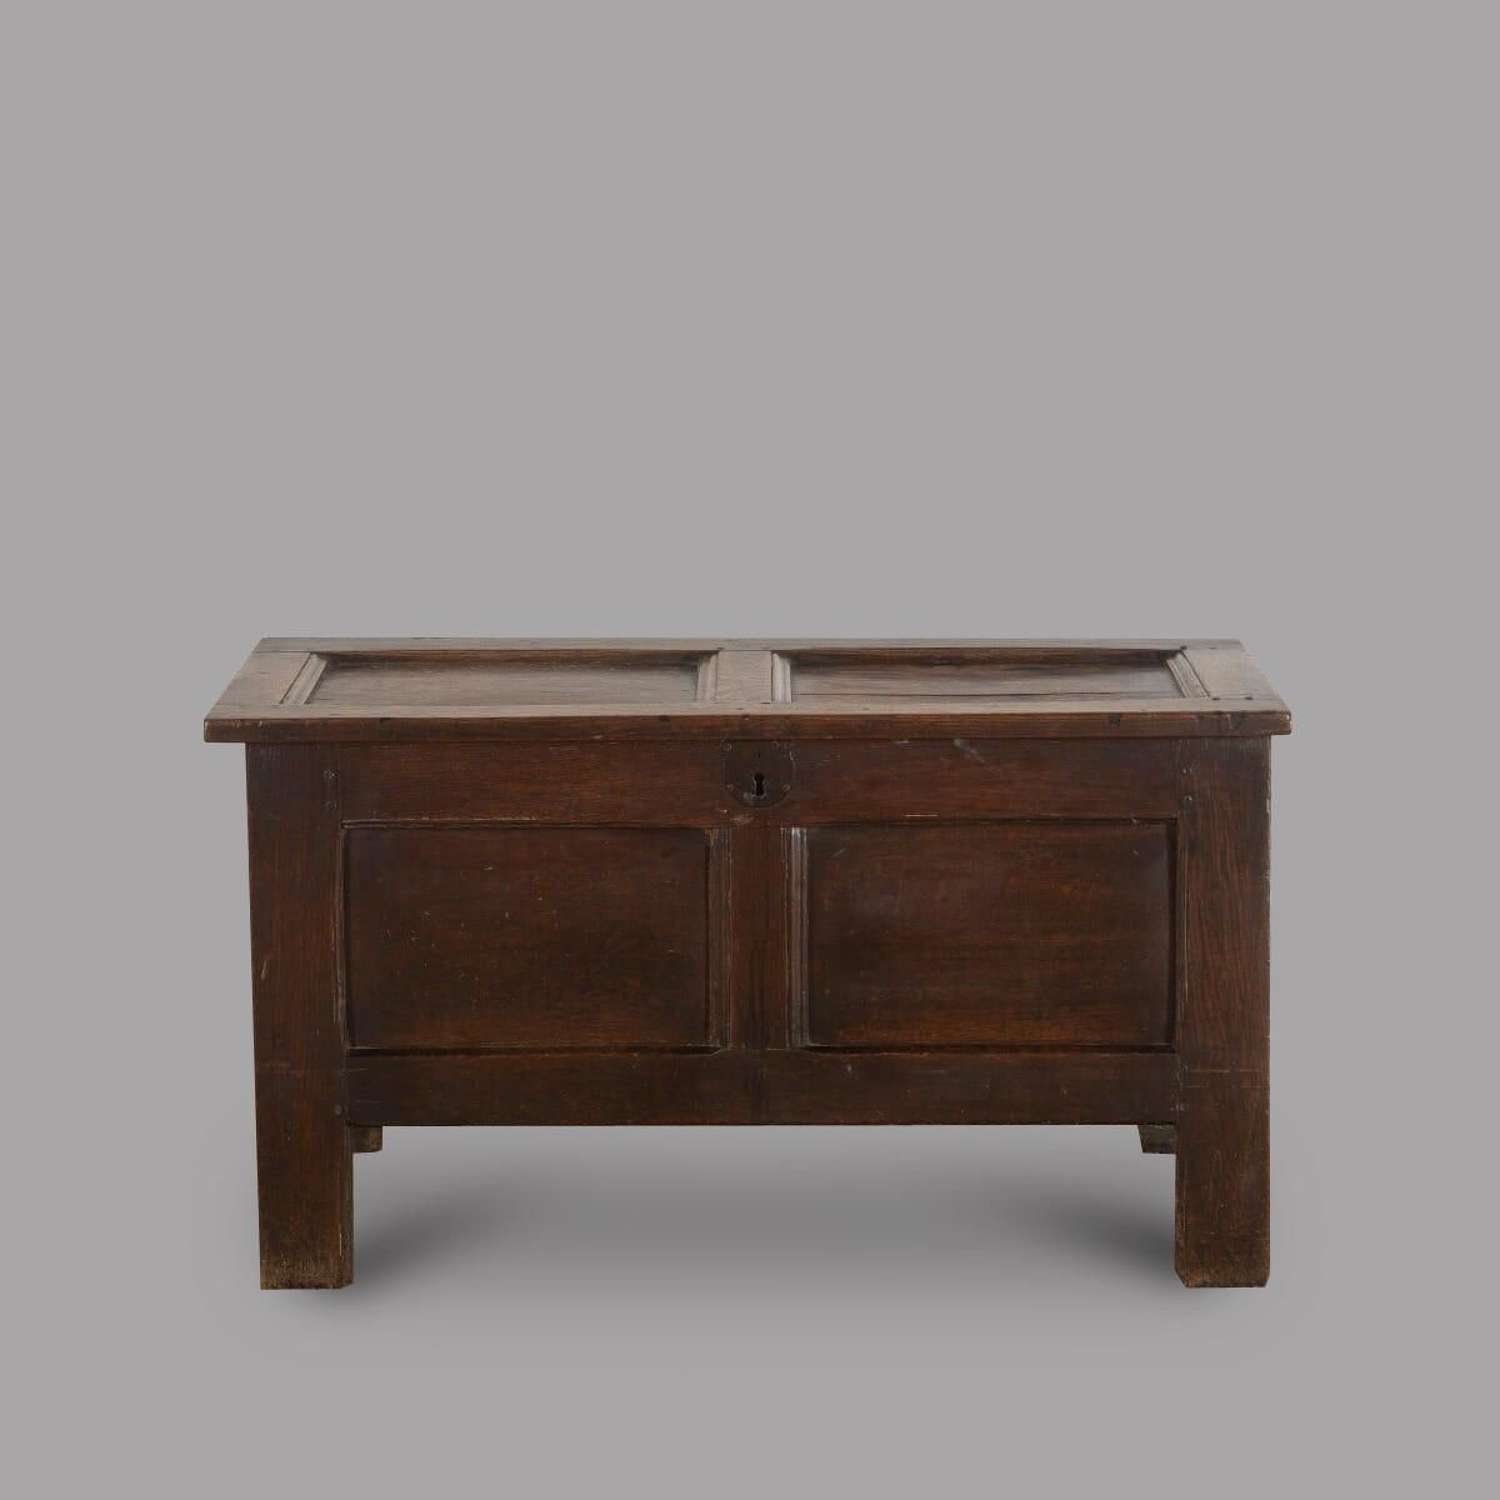 Early 18th Century Rustic Panelled Footed Oak Coffer